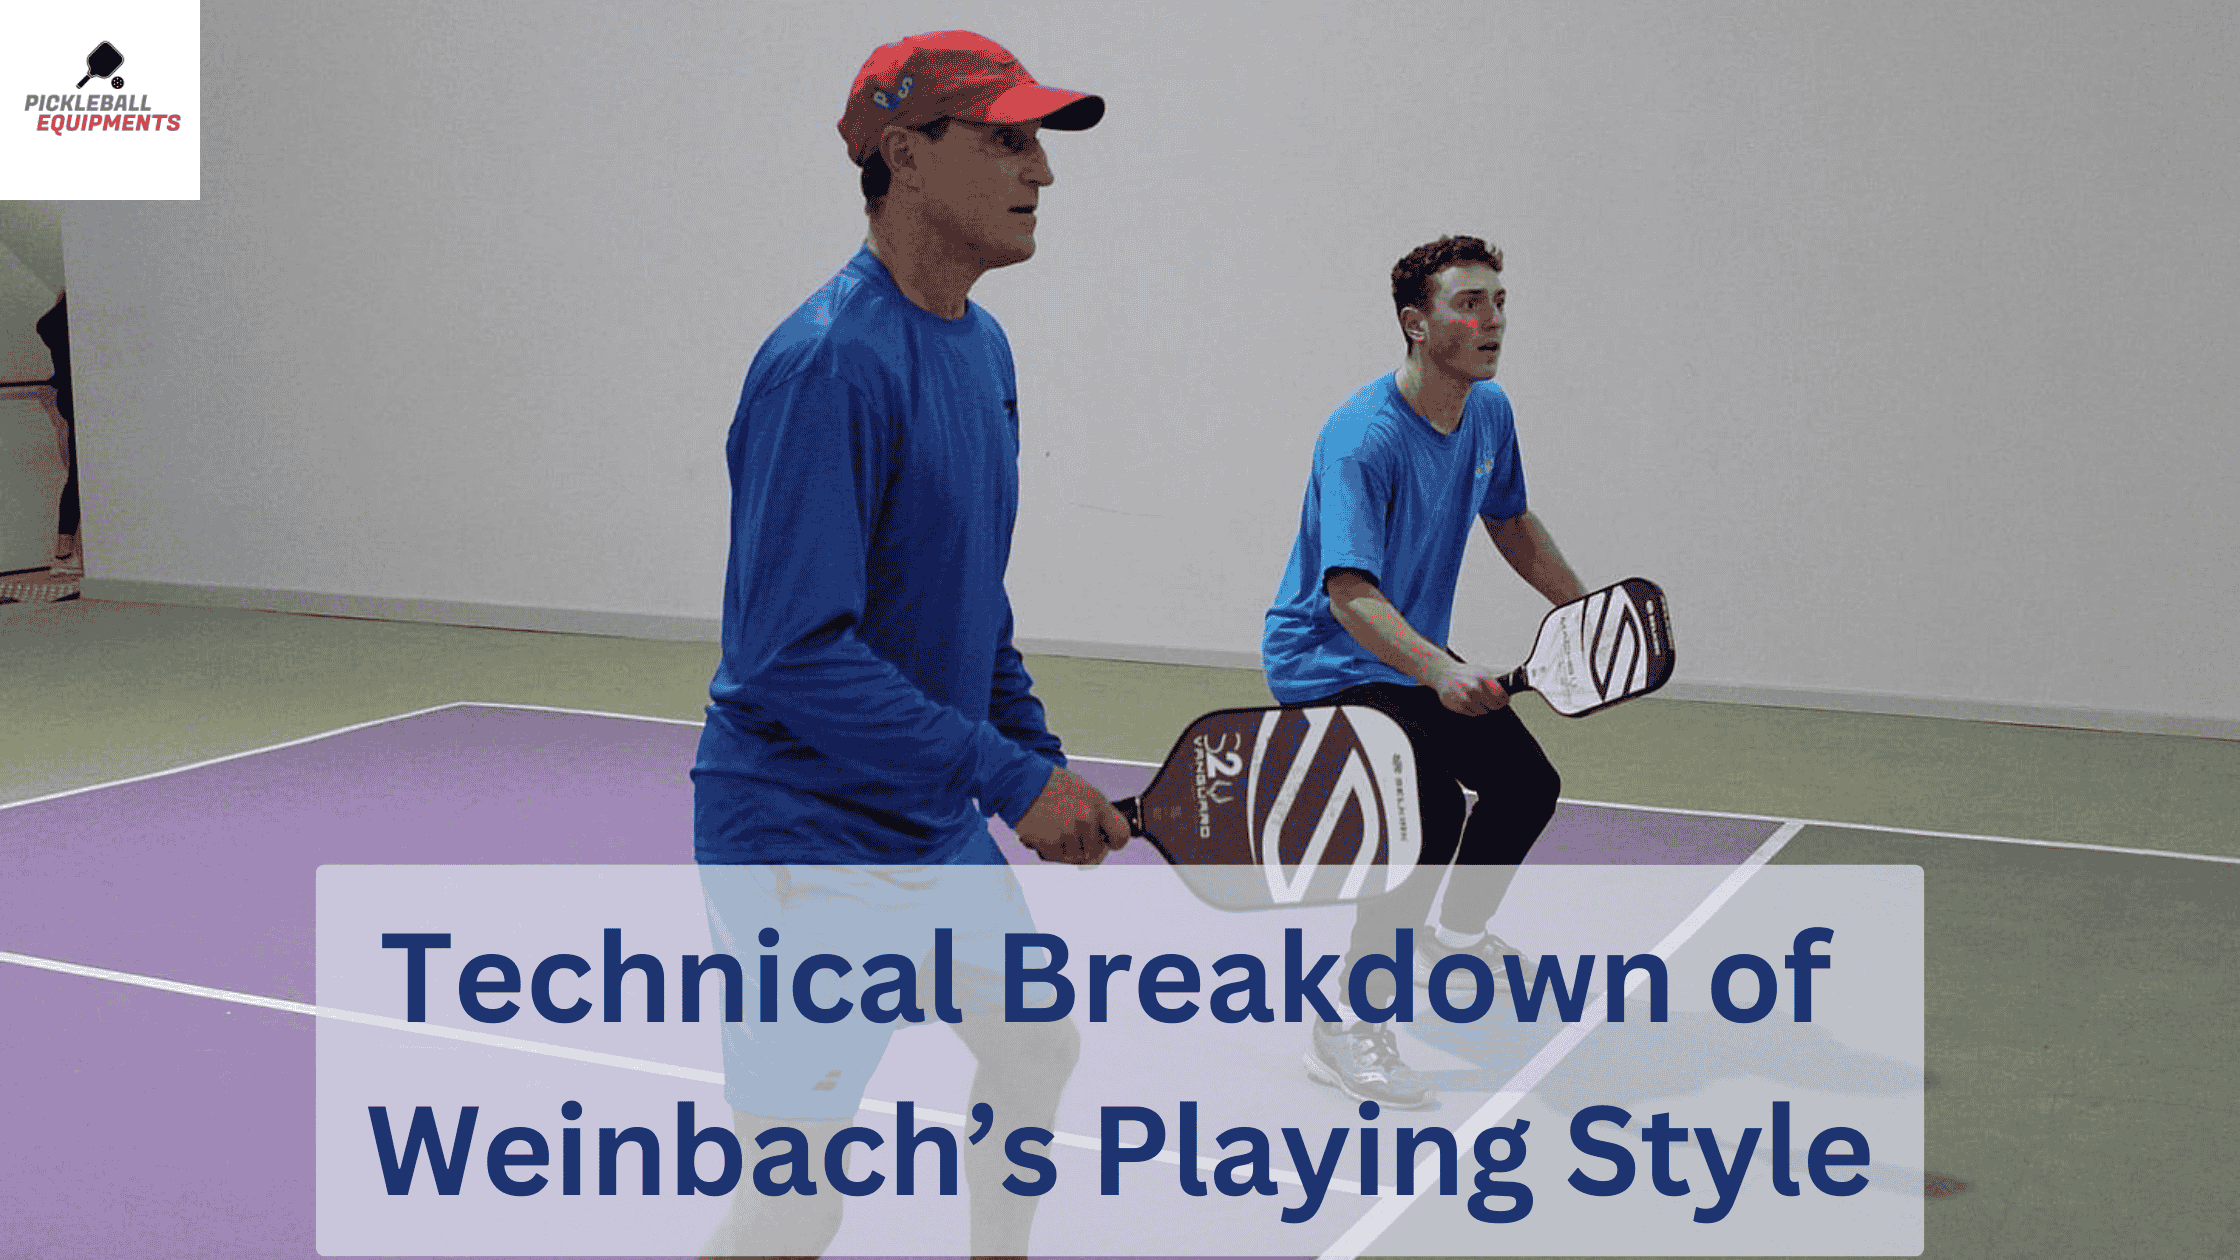 Technical Breakdown of Weinbach’s Playing Style